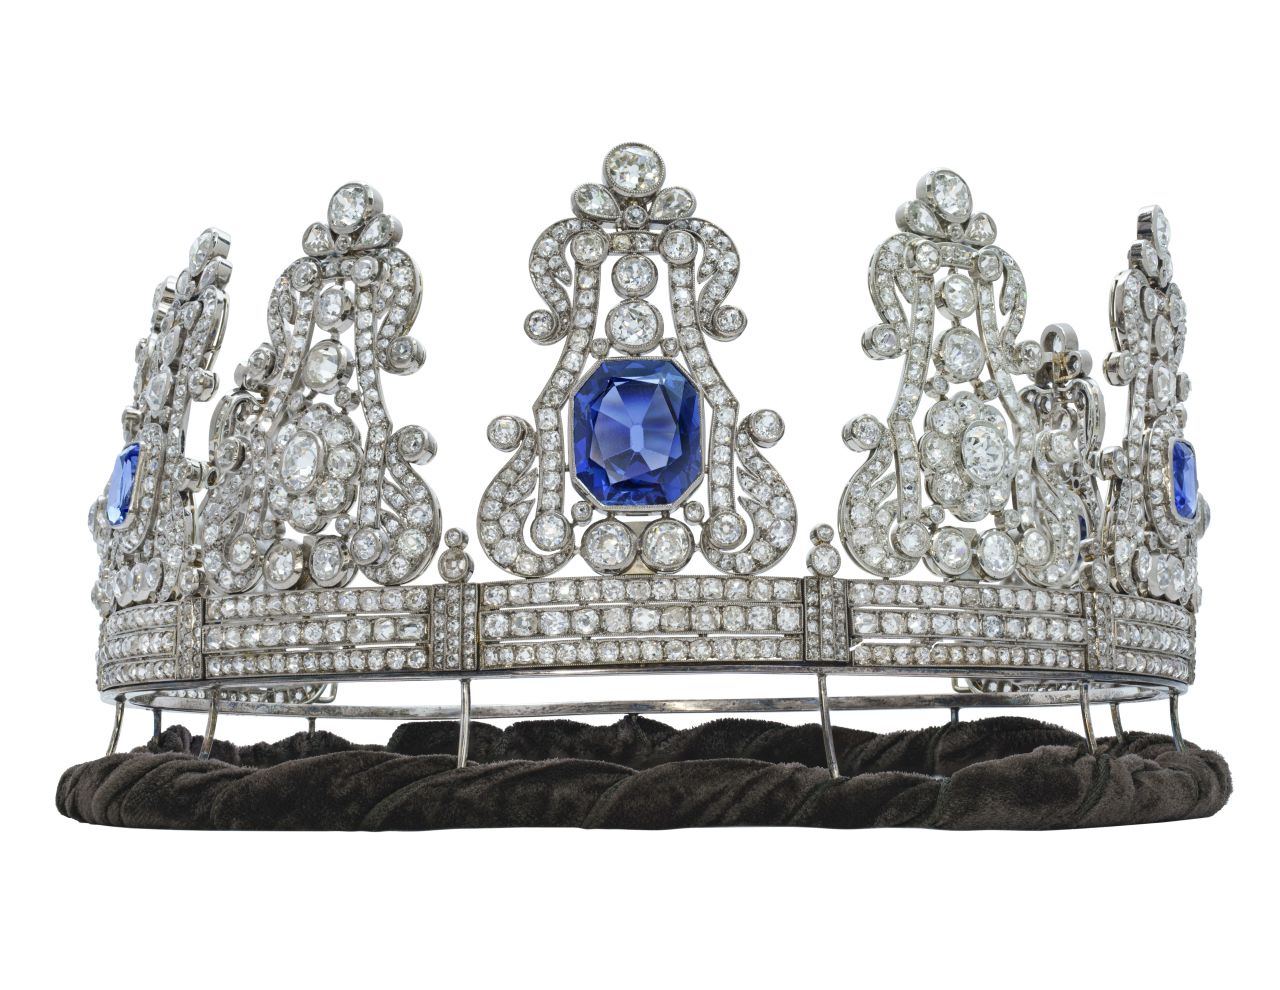 The crown of Maria II, whose daughter married Stephanie de Beauharnais' grandson, is also part of the Christie's sale.